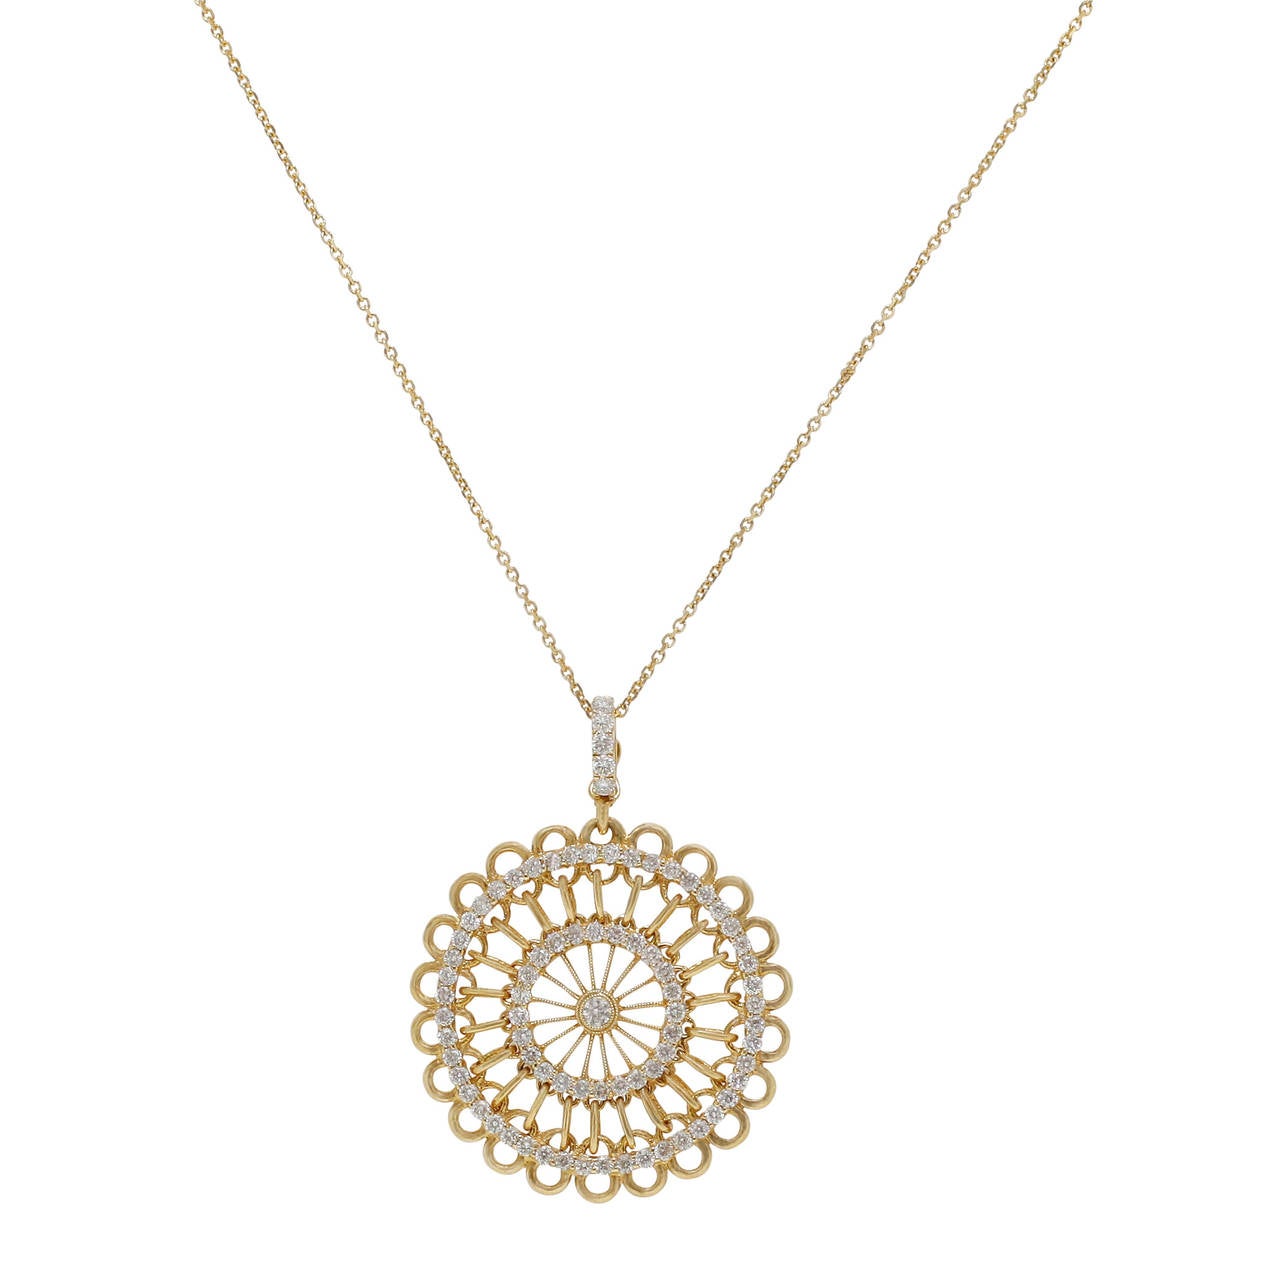 This Burdeen's Jewelry Spectacular 14K Yellow Gold Round Spindle Diamond Pendant...has faceted round diamonds that are prong-set in 2 circles, covering the circumference of the pendant ( 2.08ctw.). A center larger diamond is bezel-set, and the bail